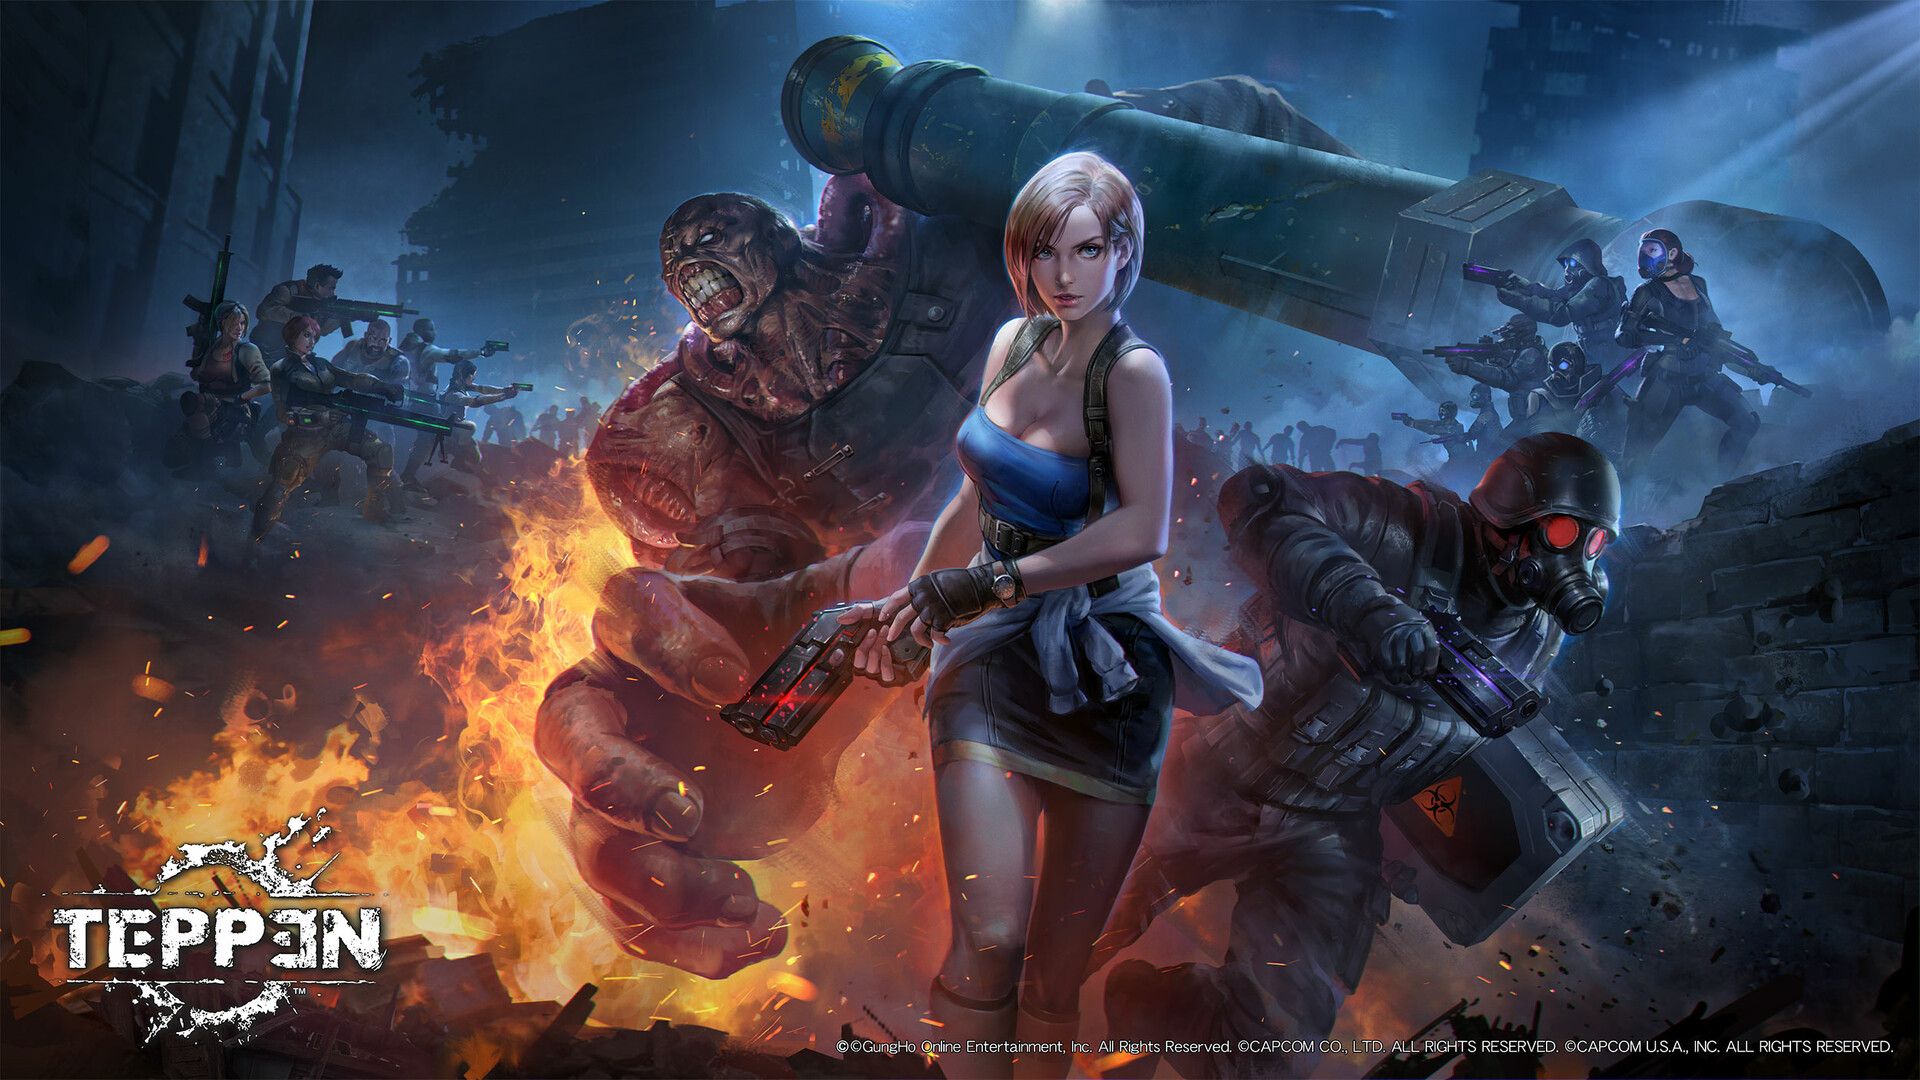 General 1920x1080 Jeremy Chong drawing Resident Evil Jill Valentine poster video game art women brunette short hair weapon gun skirt cleavage backpacks fire sparks creature mask helmet fighting cannons blue eyes knot looking at viewer Project Nemesis